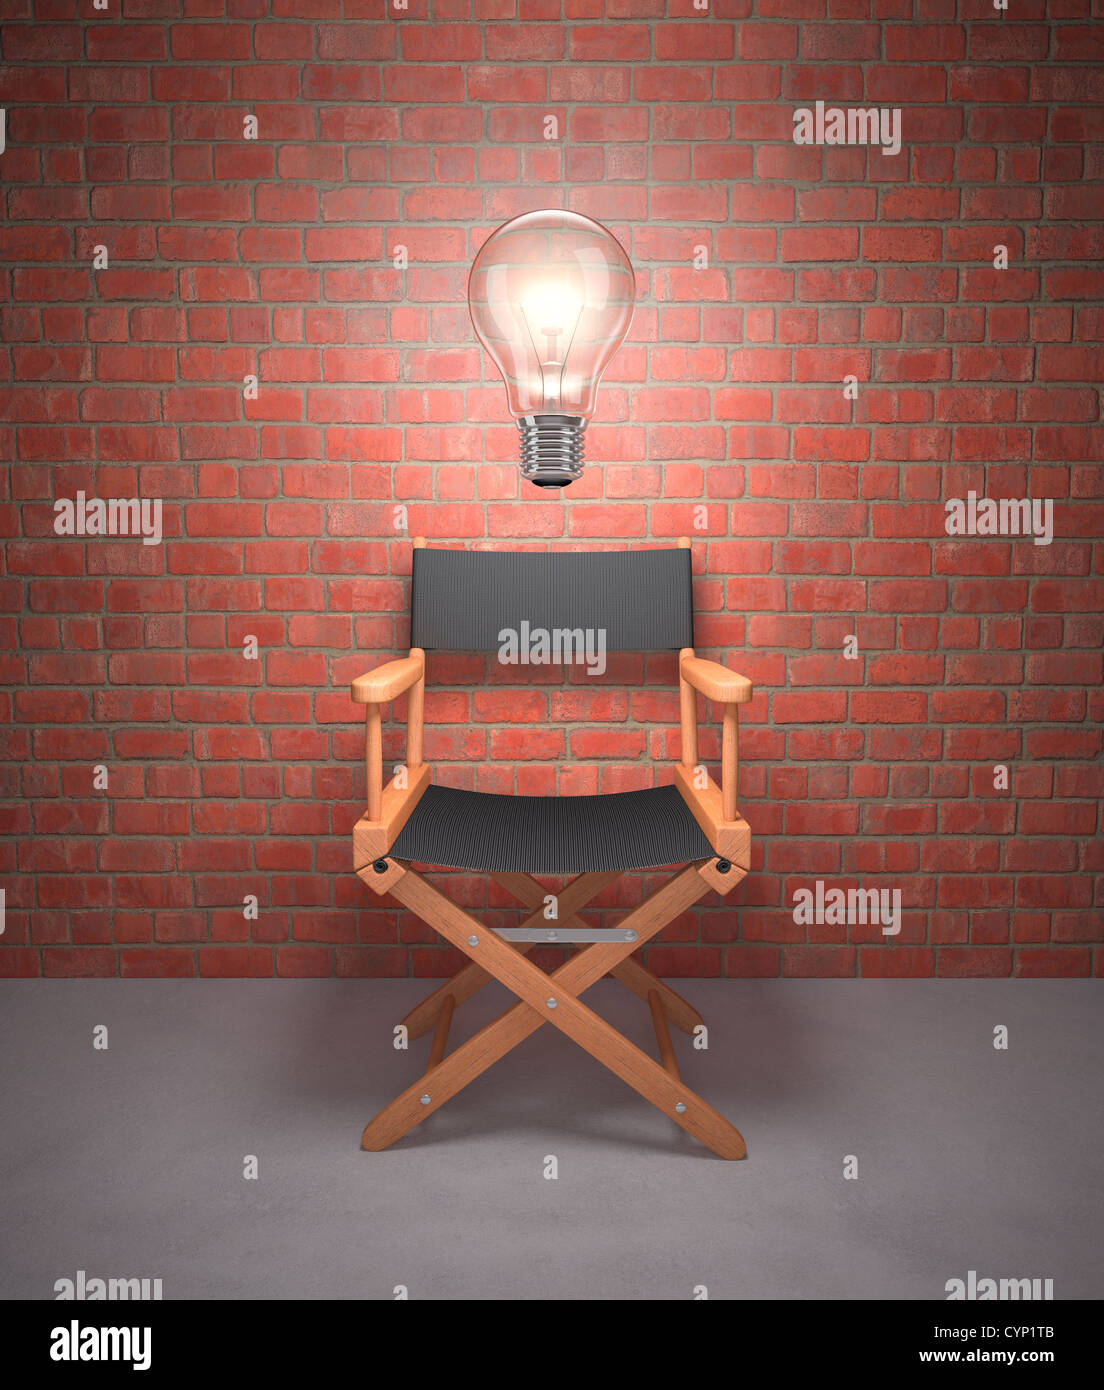 Lamp lit up on the director's chair. Stock Photo